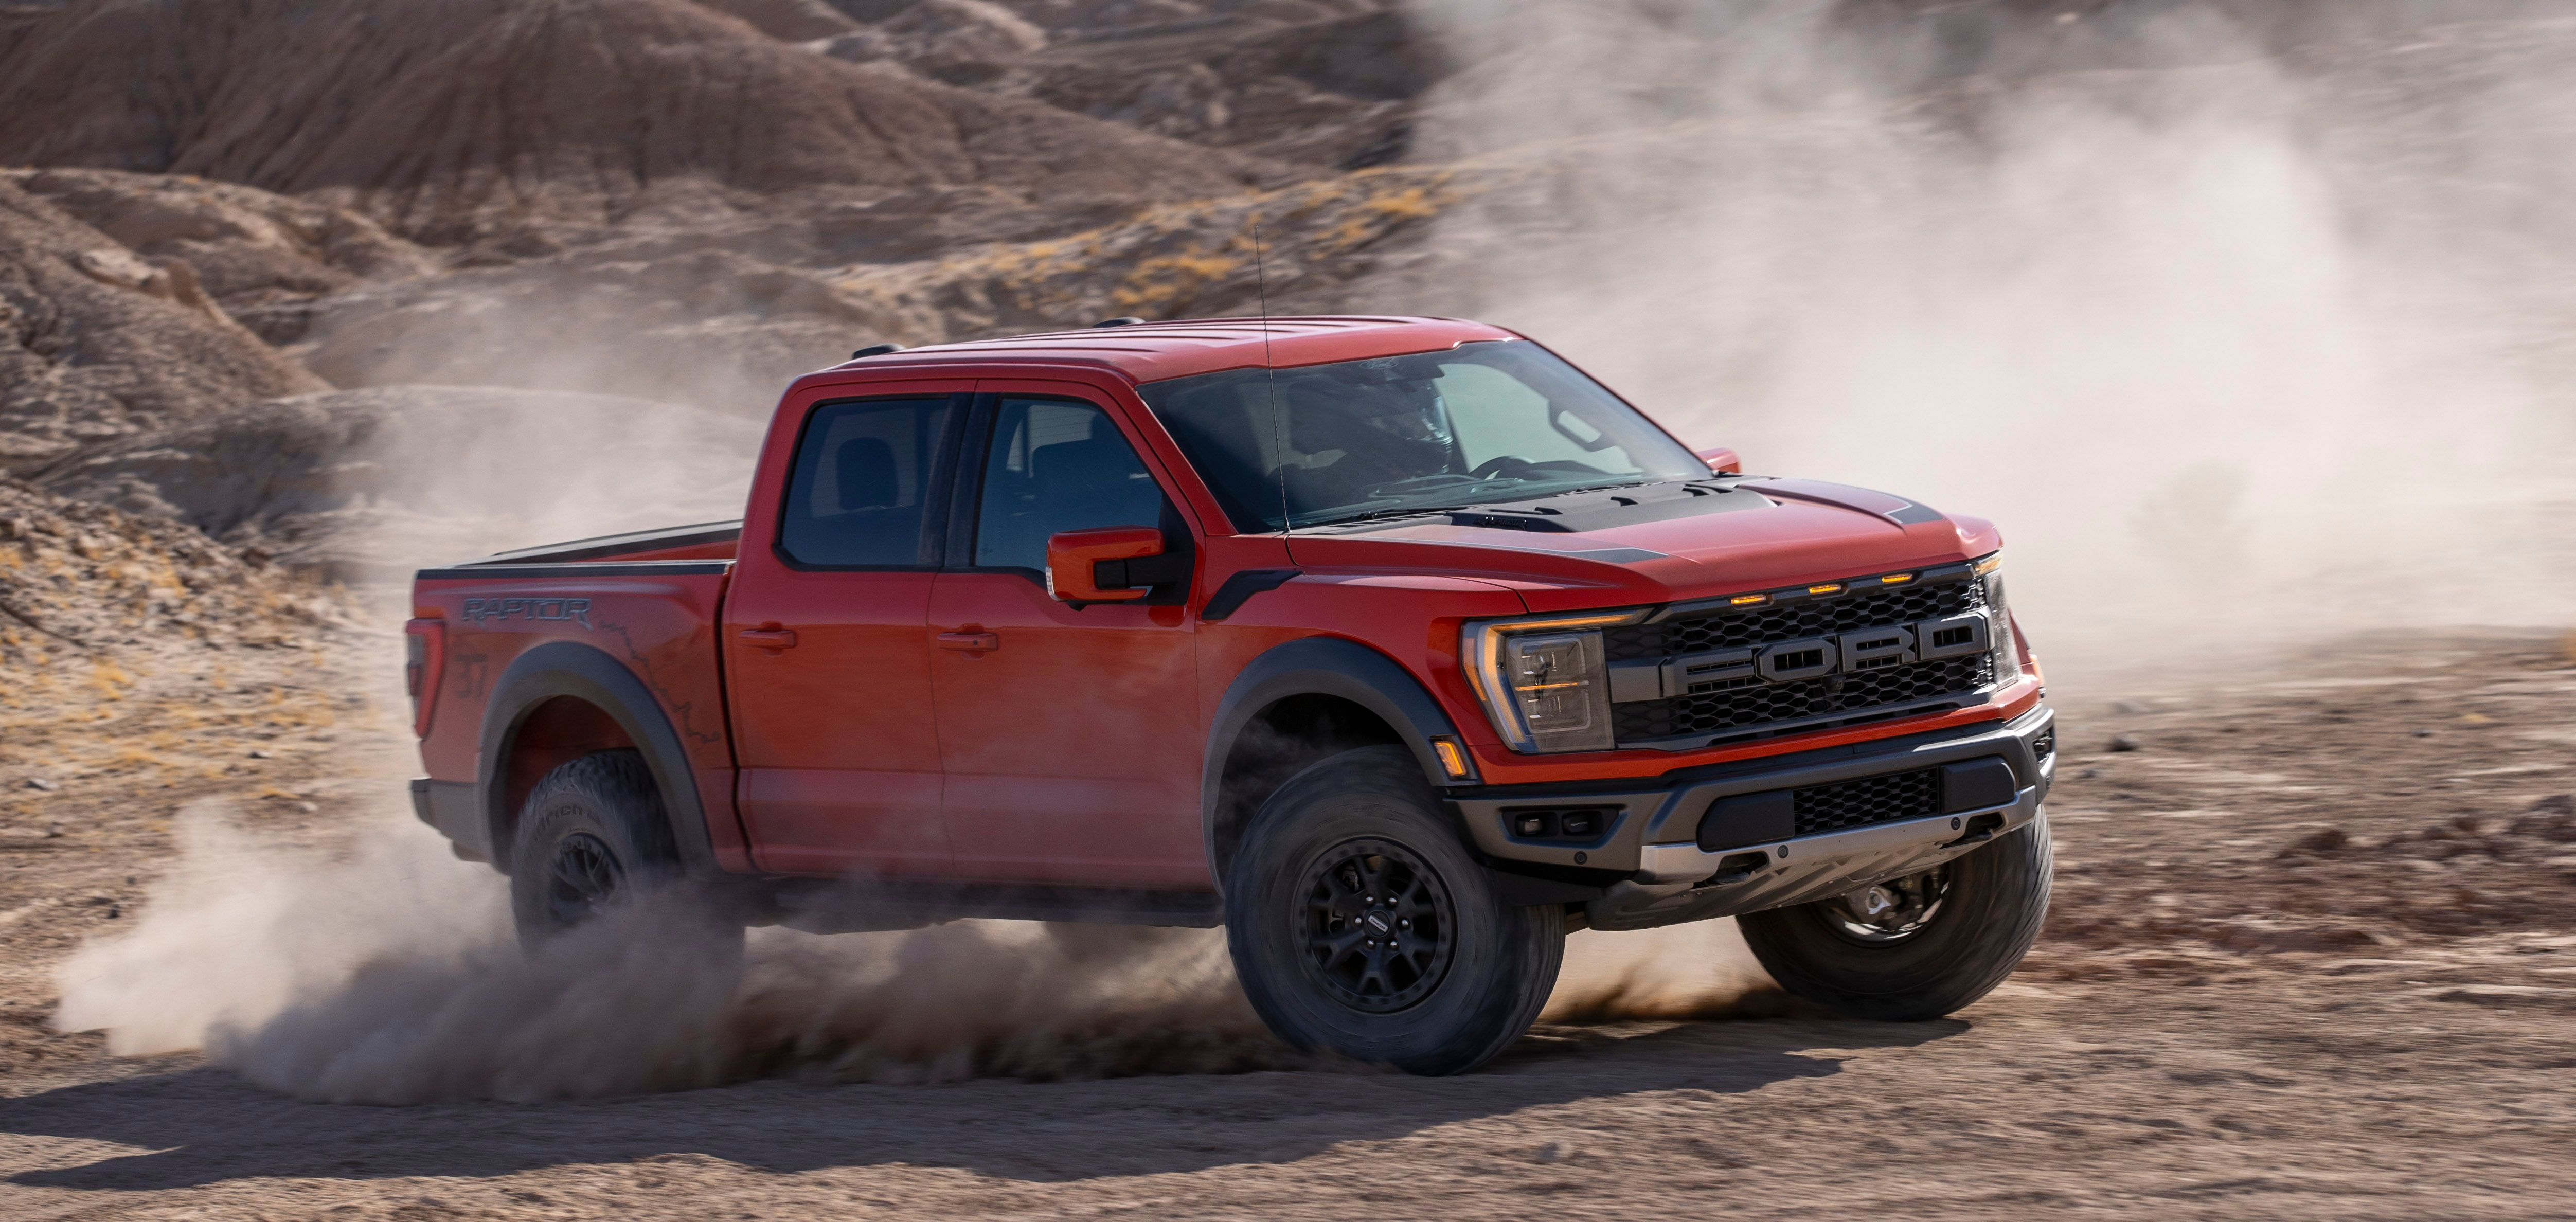 The 2022 Ford Raptor R Pickup May Be The Last Of The V8 Ford Trucks